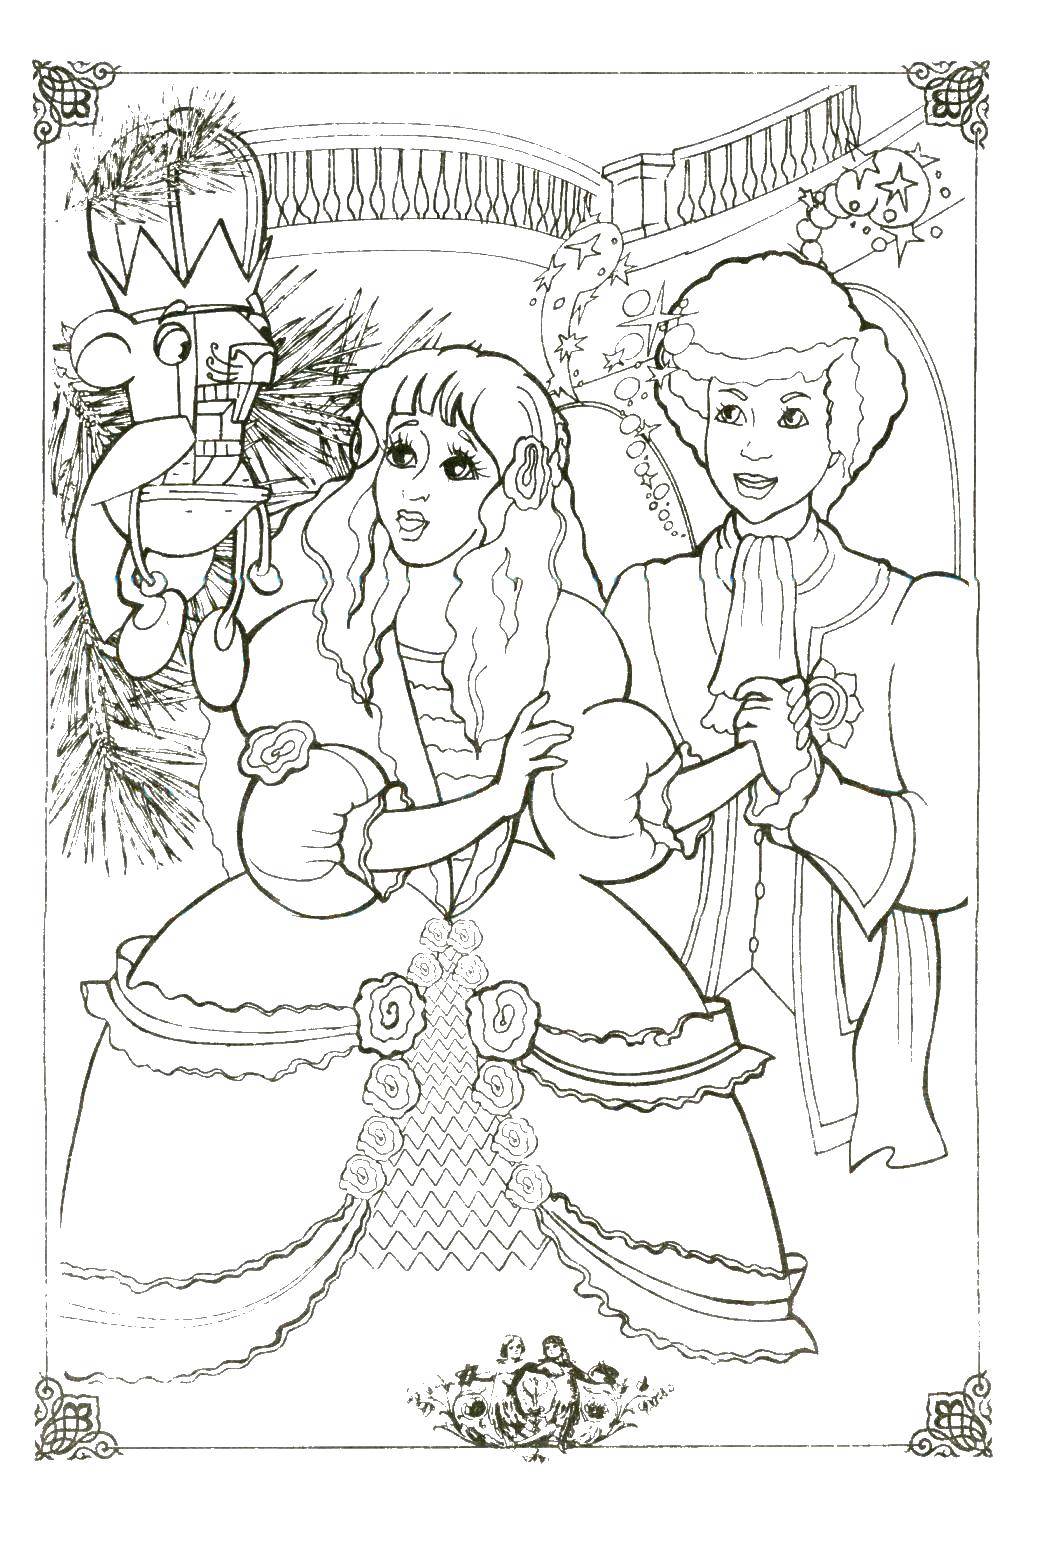 Coloring Fiona and the Nutcracker. Category the Nutcracker. Tags:  Fiona, the boy, the Nutcracker.